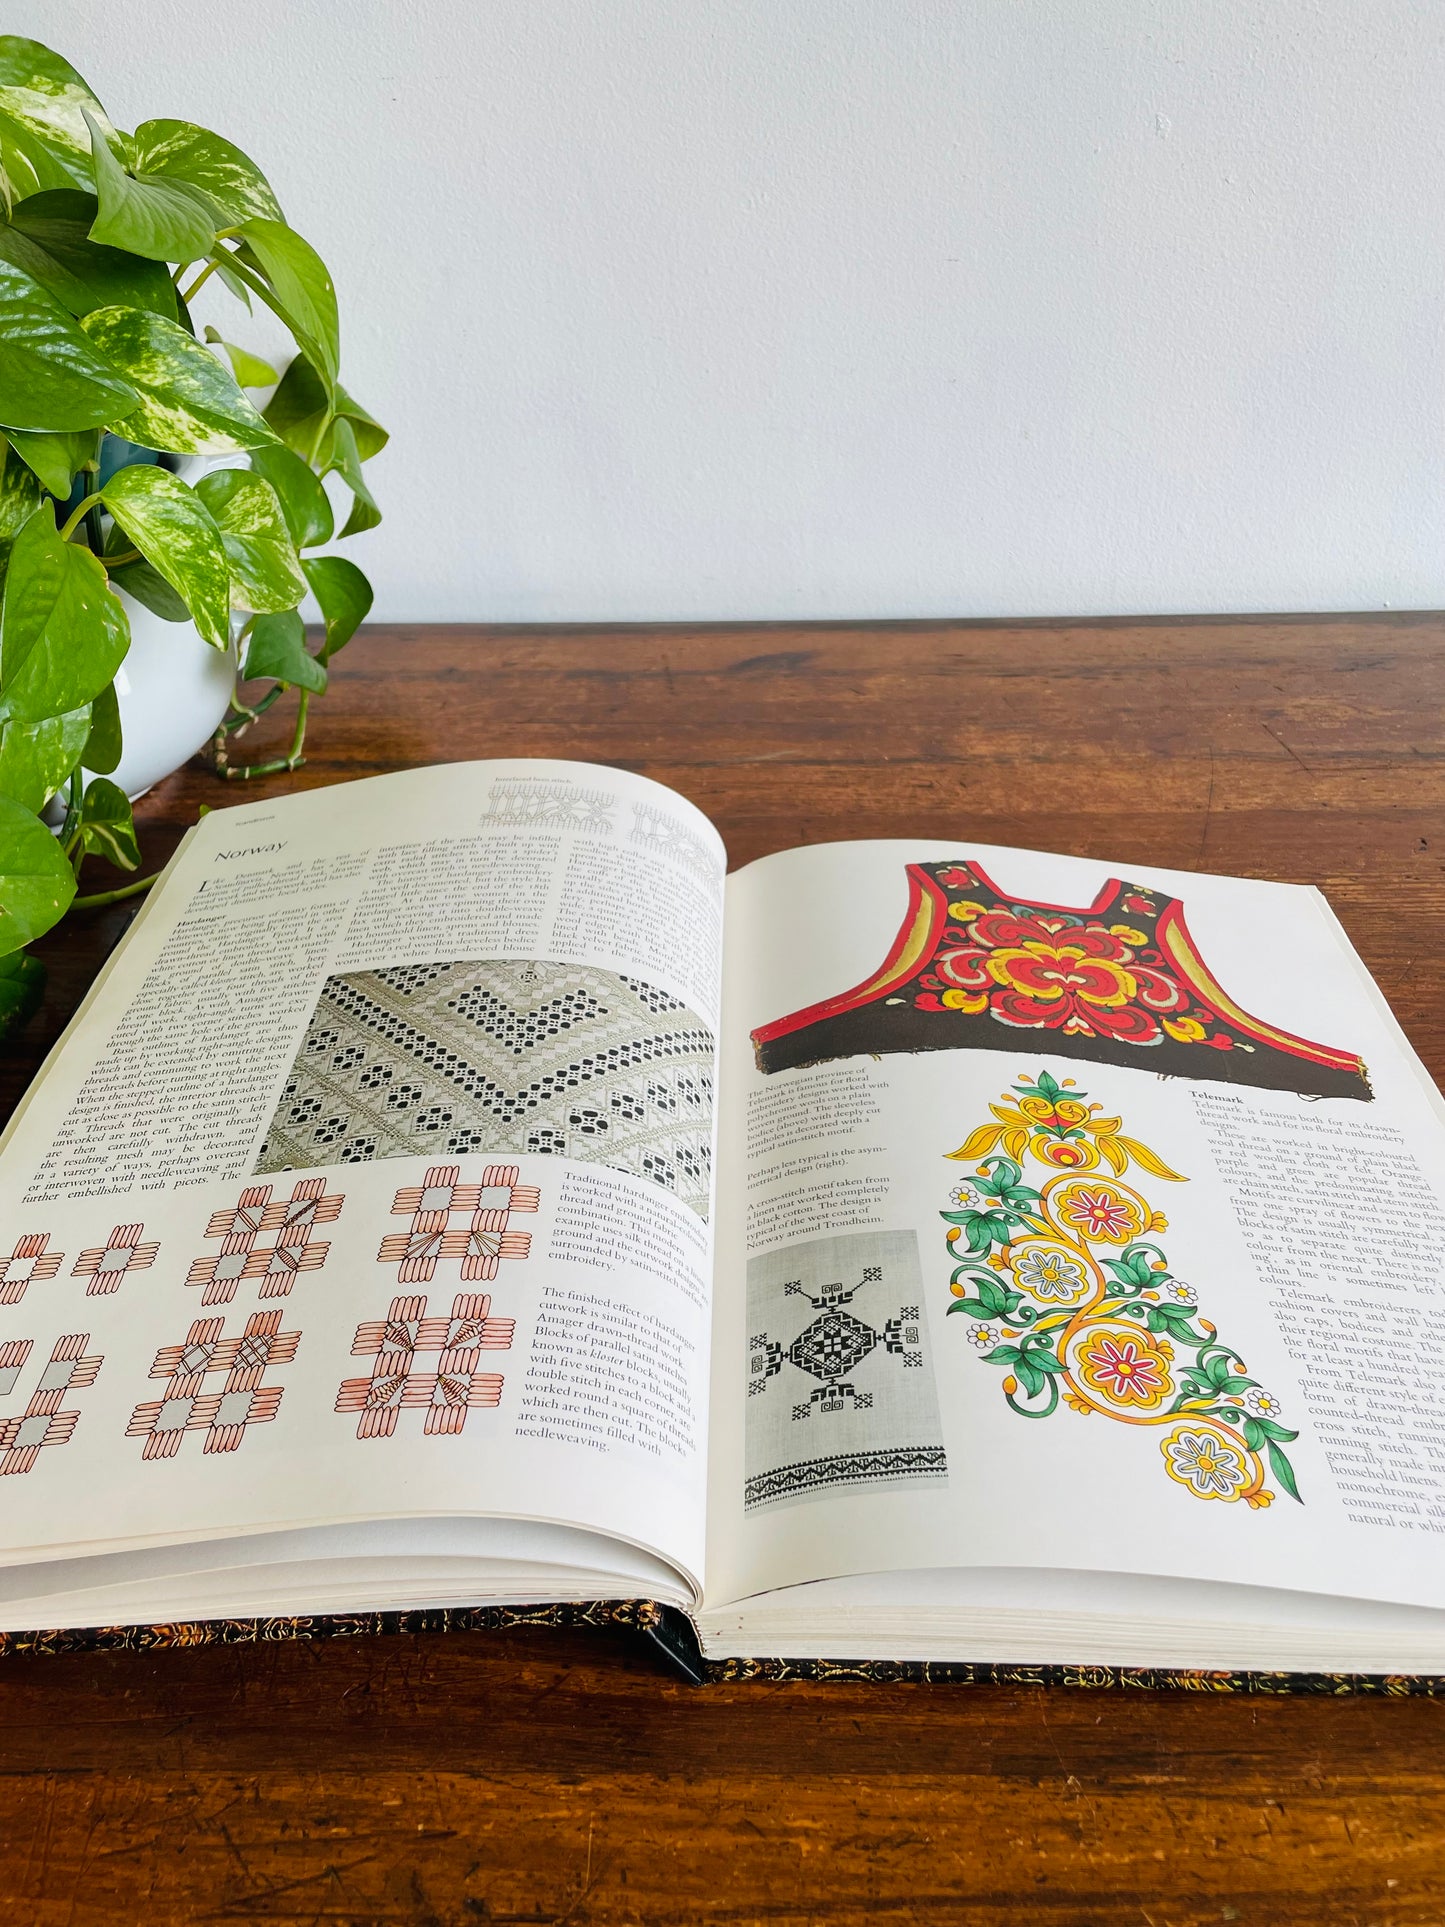 Embroidery: Traditional Designs, Techniques And Patterns From All Over The World Hardcover Book by Mary Gostelow (1982)